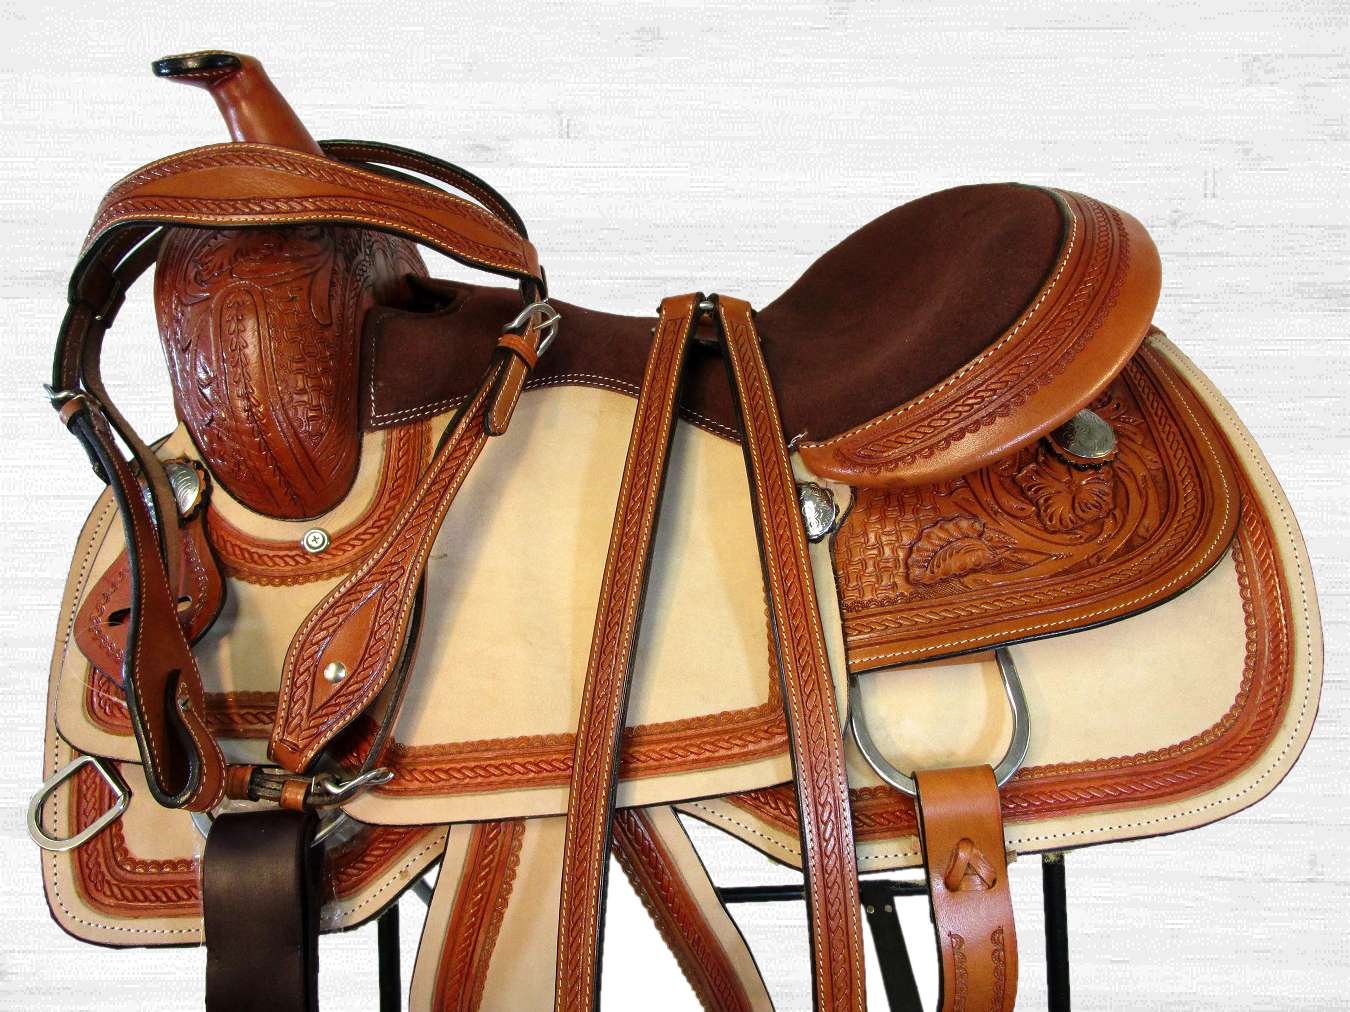 PADDED SEAT WESTERN SADDLE ROPING ROPER RANCH HORSE TOOELD LEATHER 15 ...